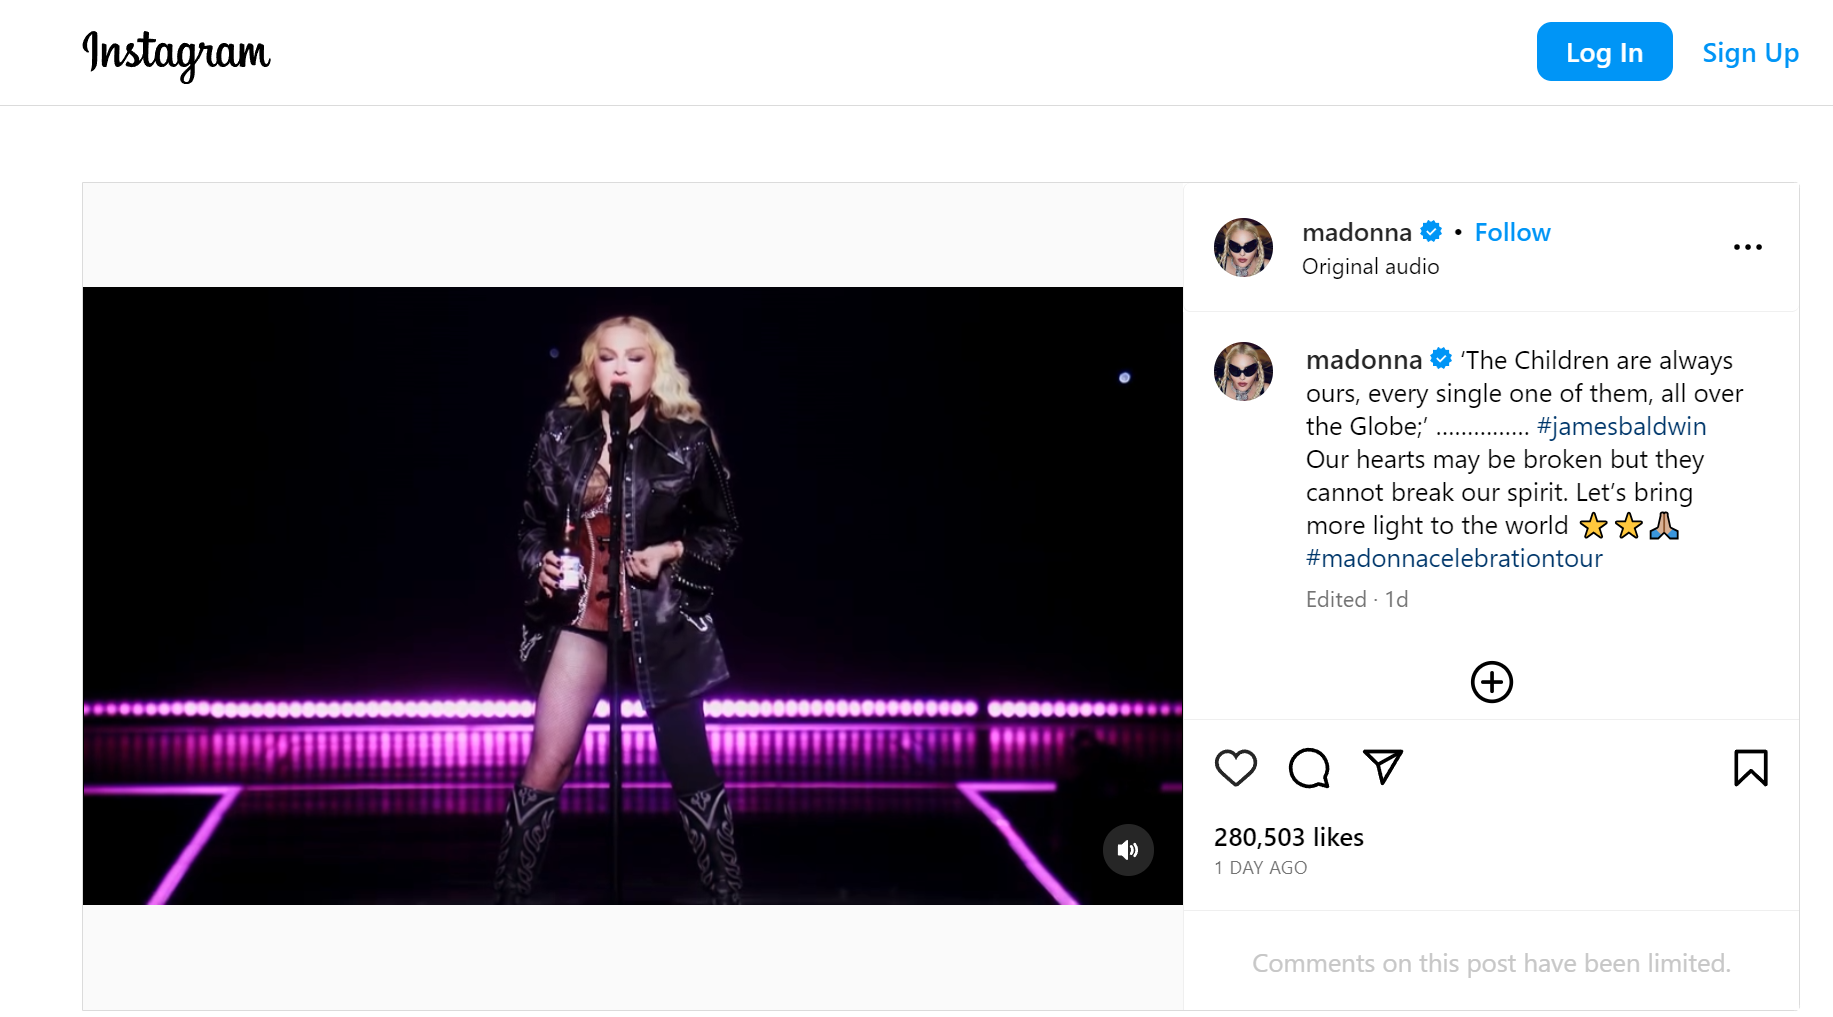 Madonna Gives Impassioned Call for Social Action During London Concert